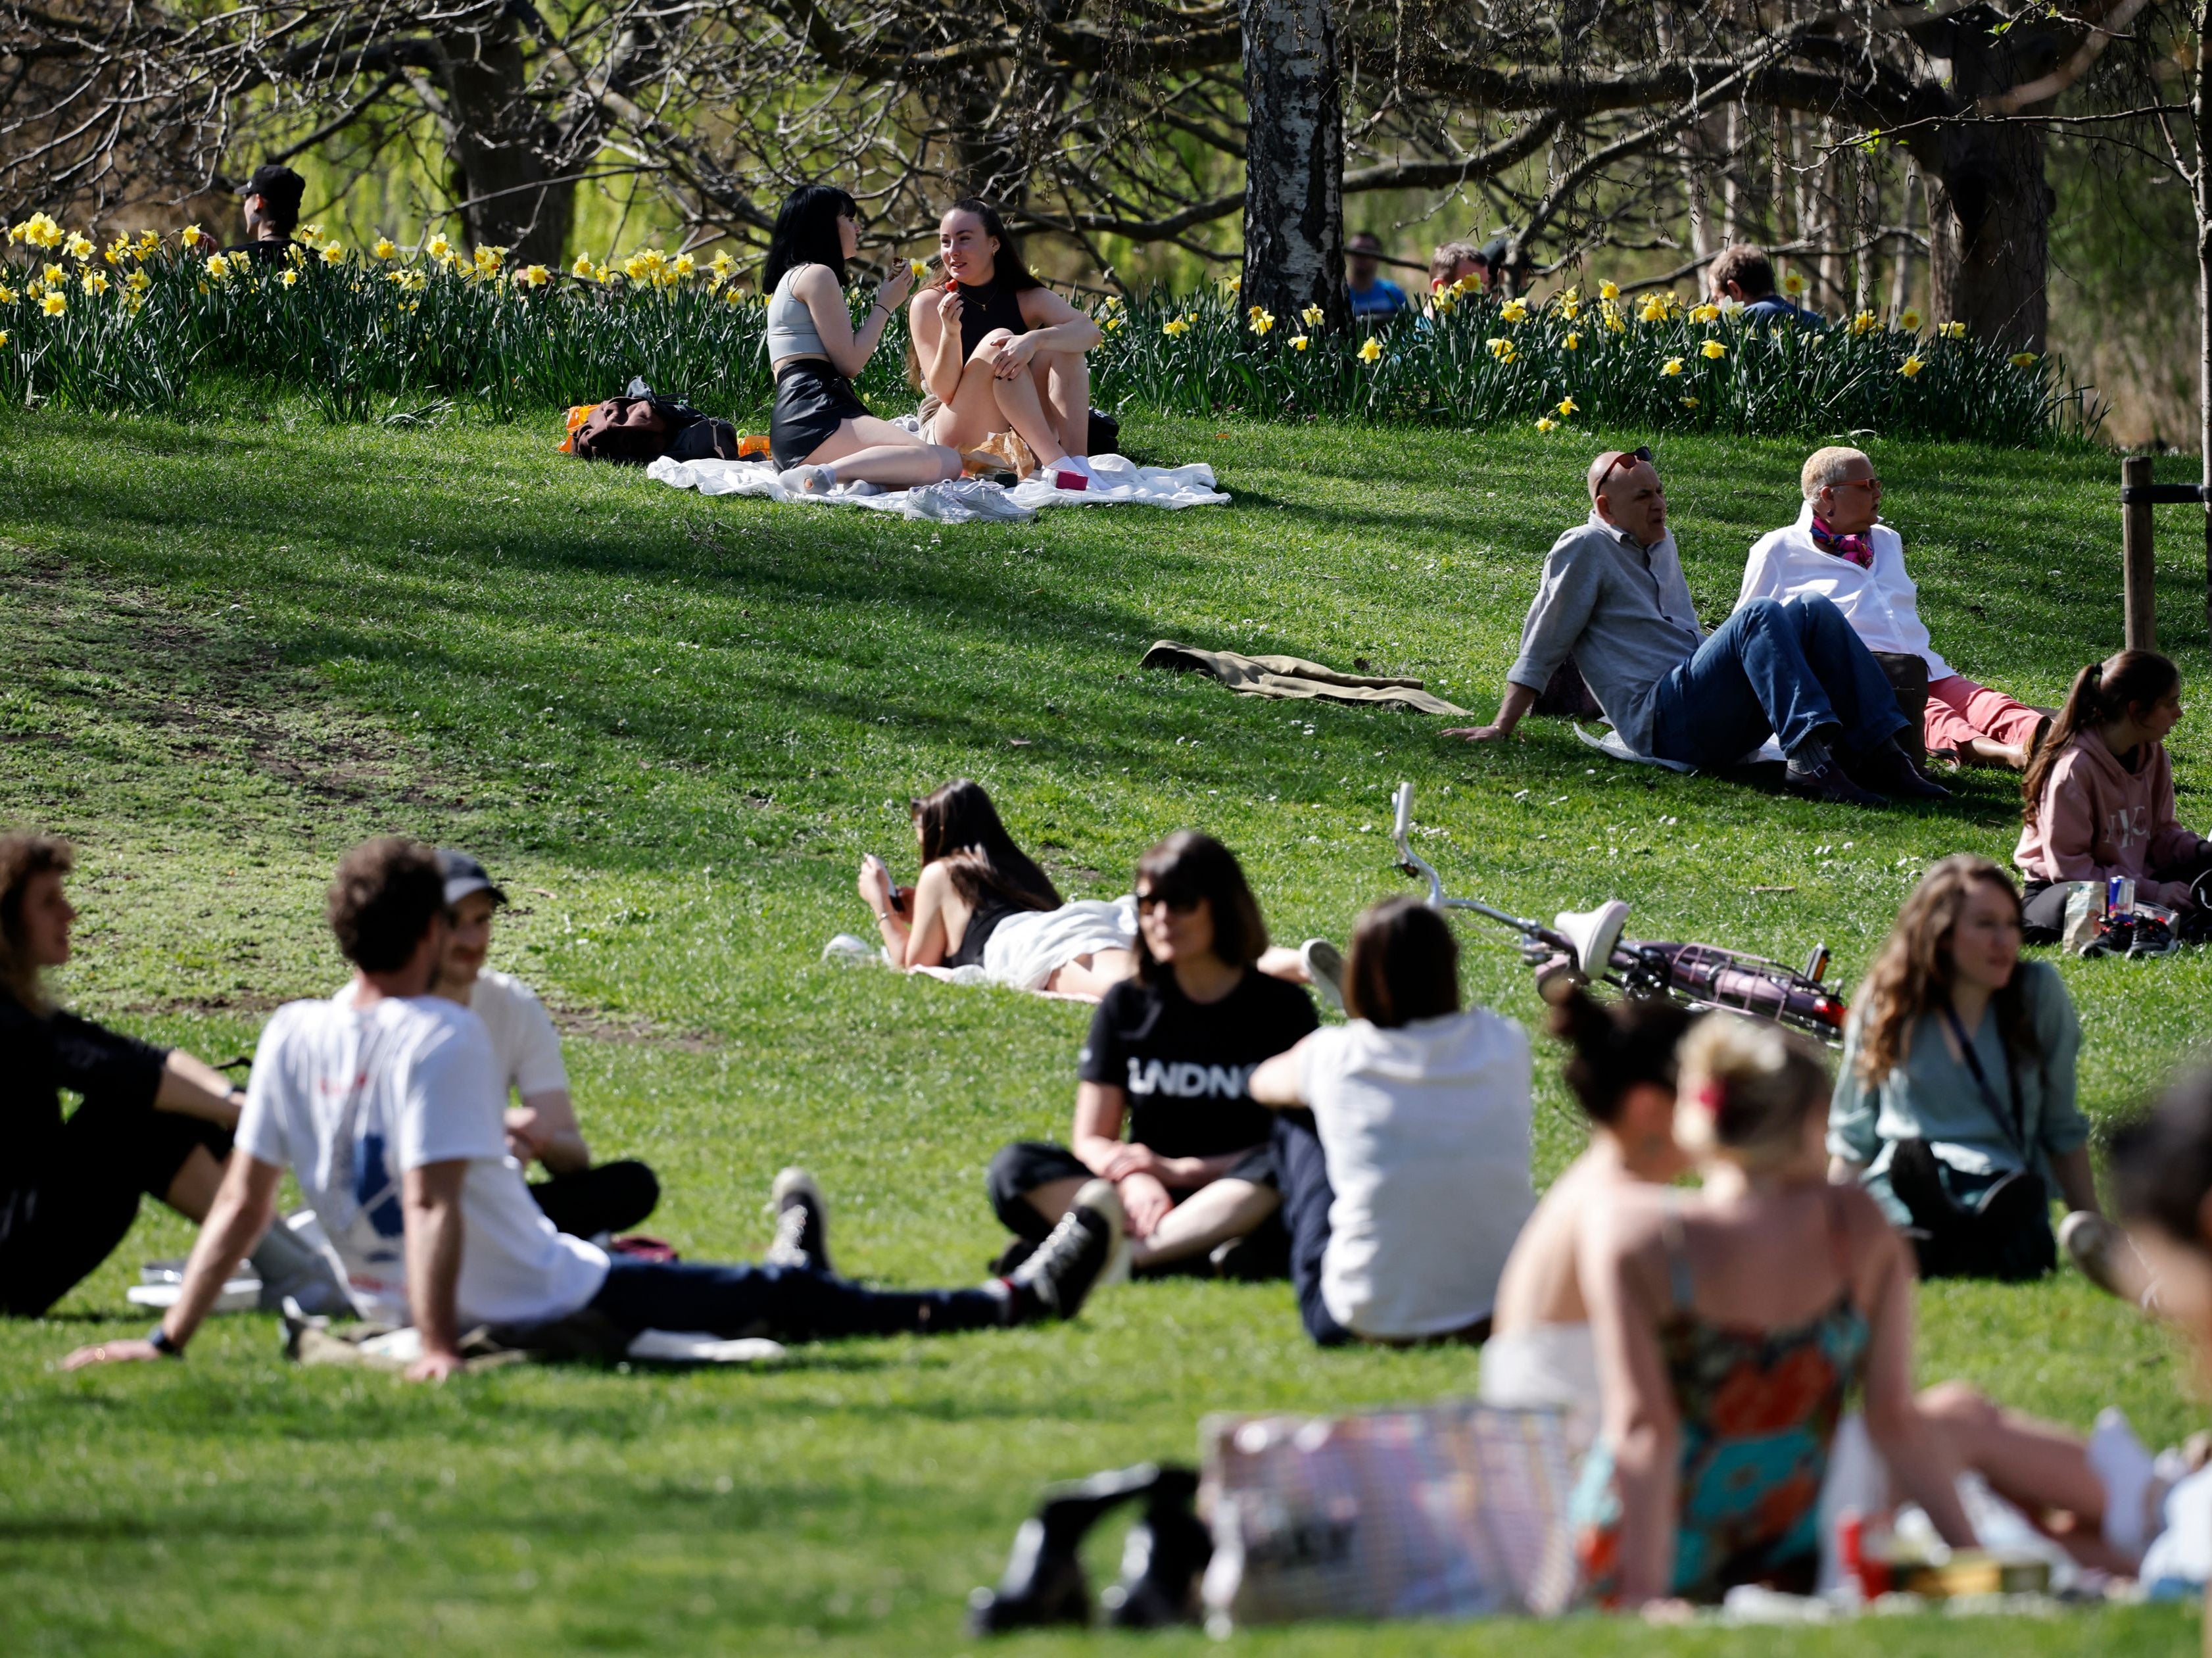 St James’s Park was bustling with people as temperatures reached near-record highs